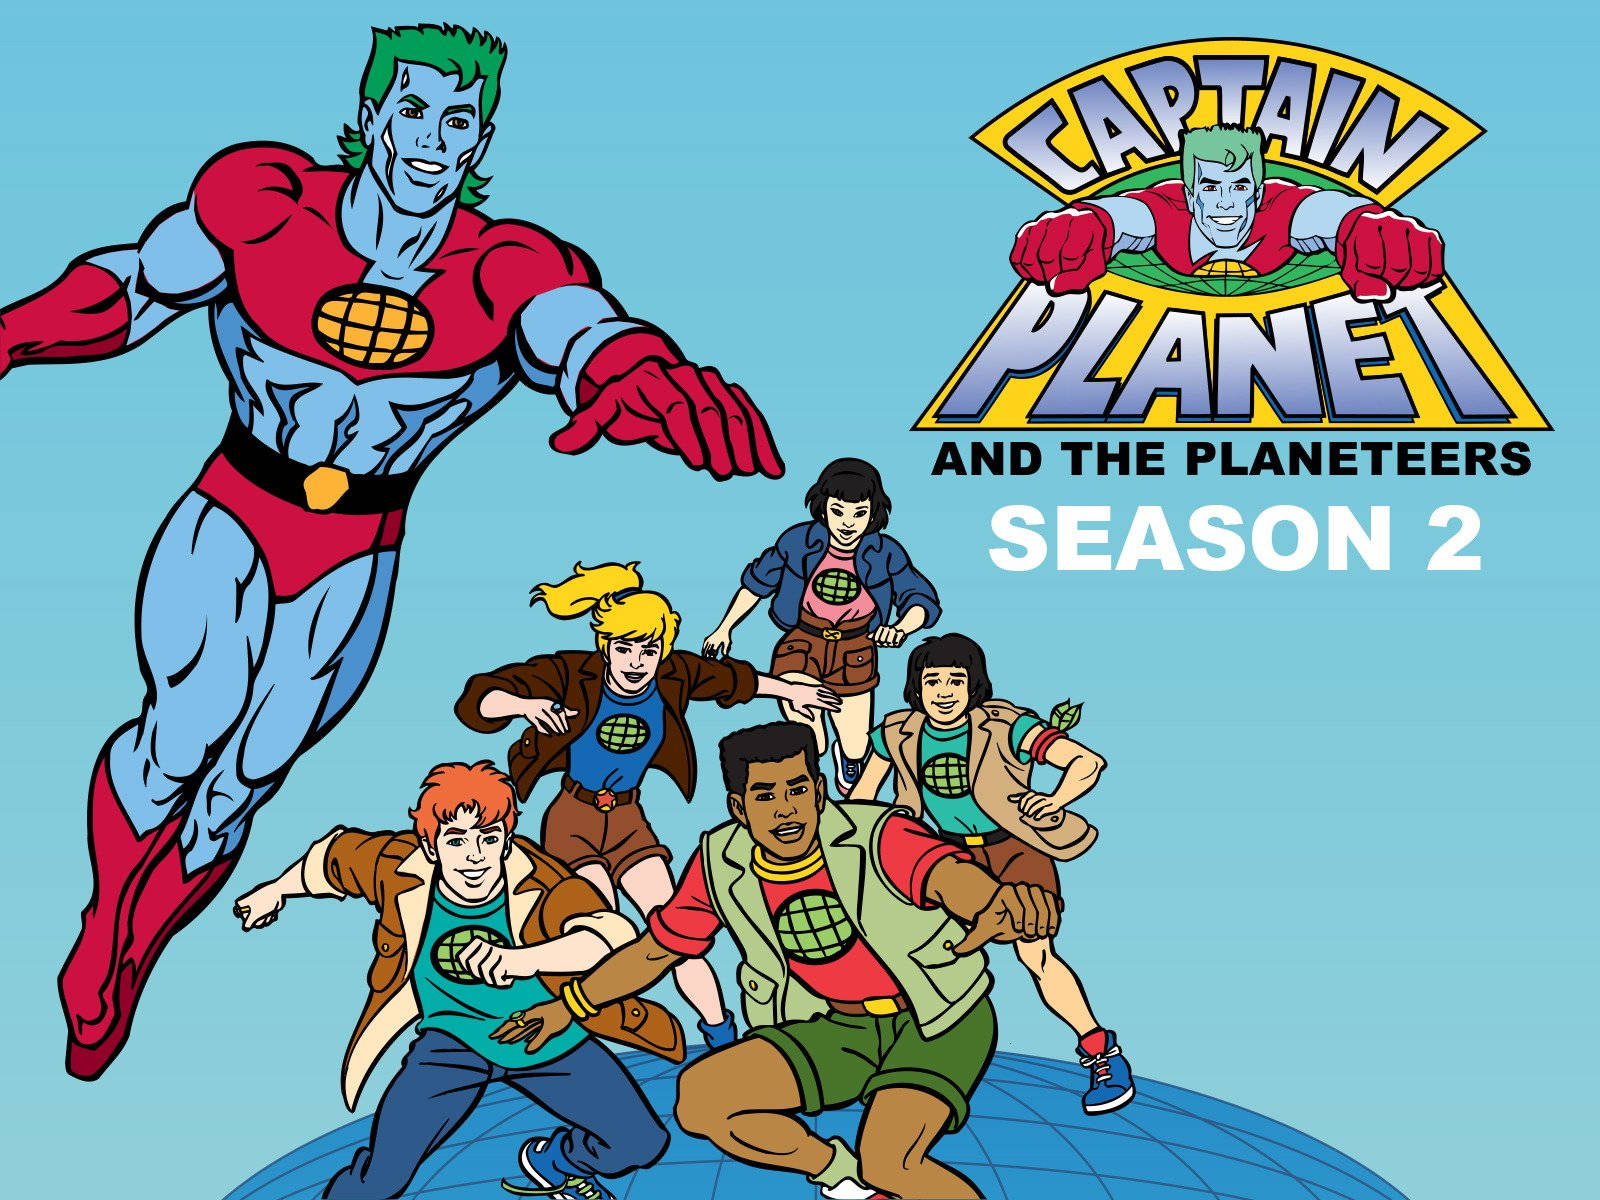 Captain Planet And The Planeteers Season 2